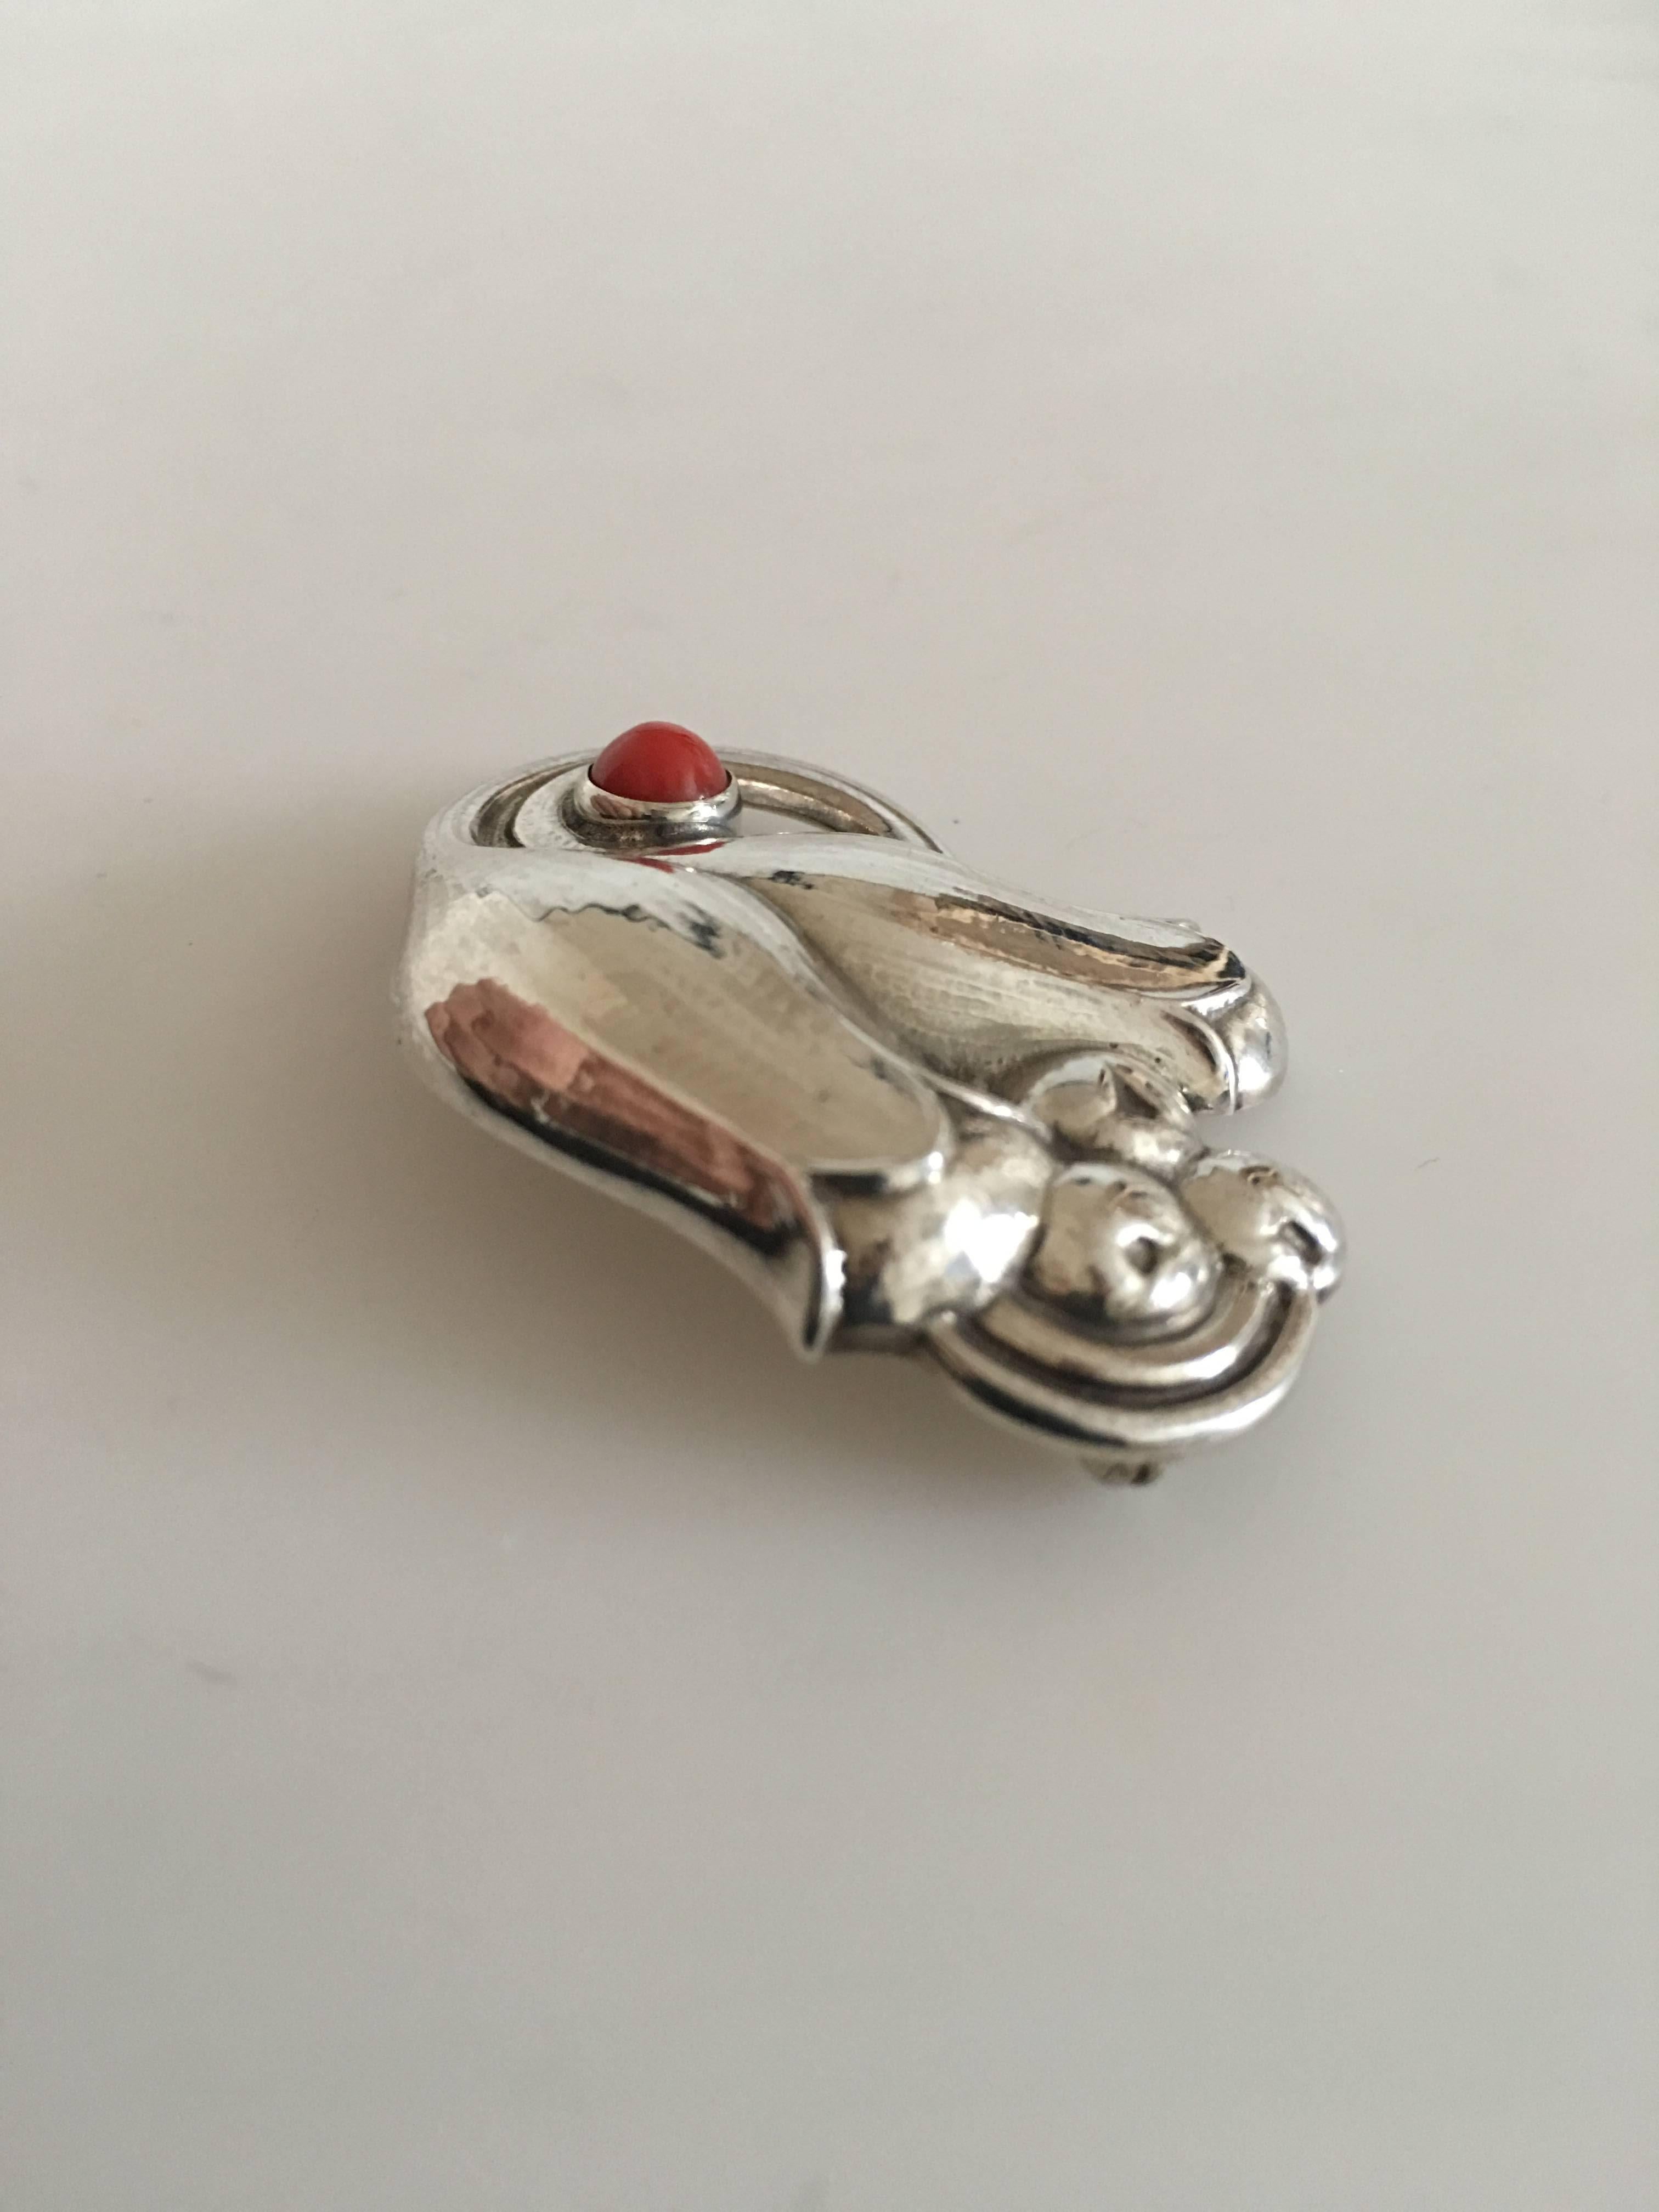 Georg Jensen sterling silver tulip brooch #100B with coral. Measures: 4.5 cm L (1 49/64